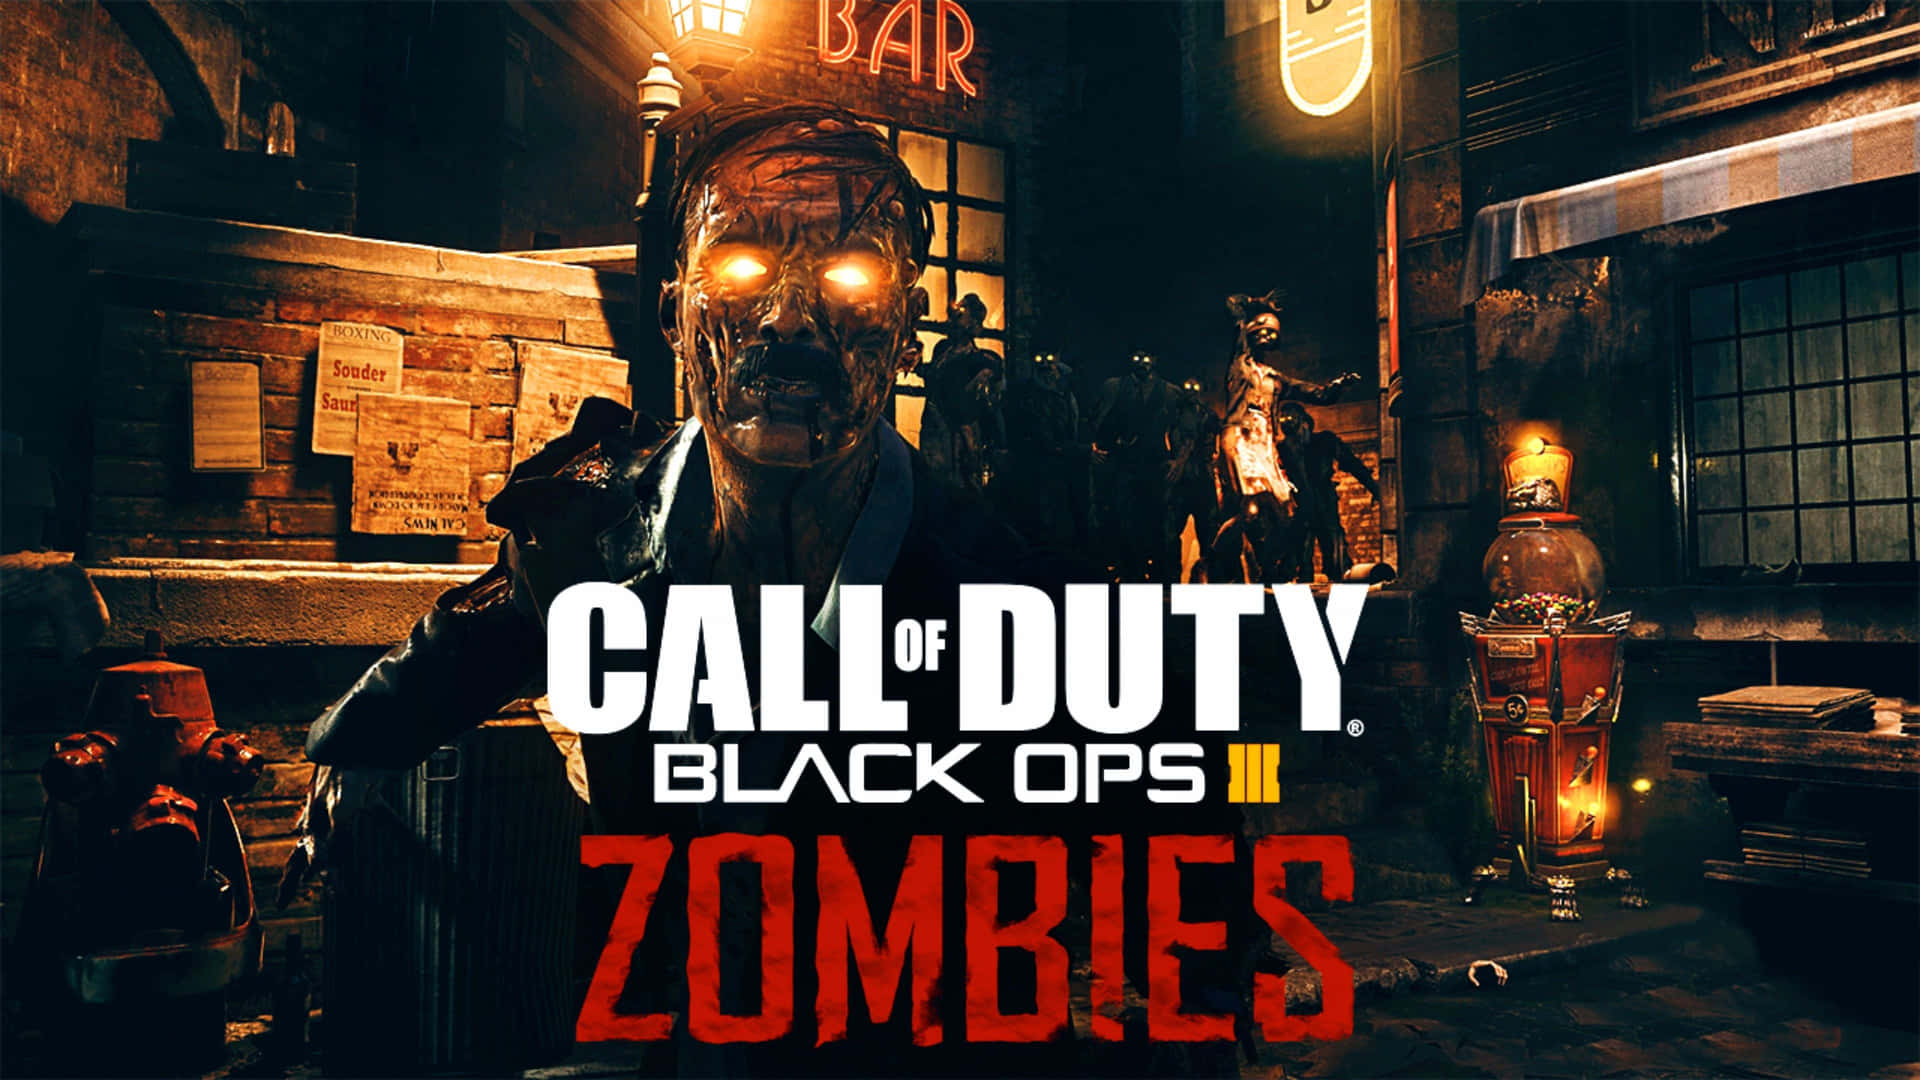 black ops zombies wallpaper hd. cod lack ops zombies